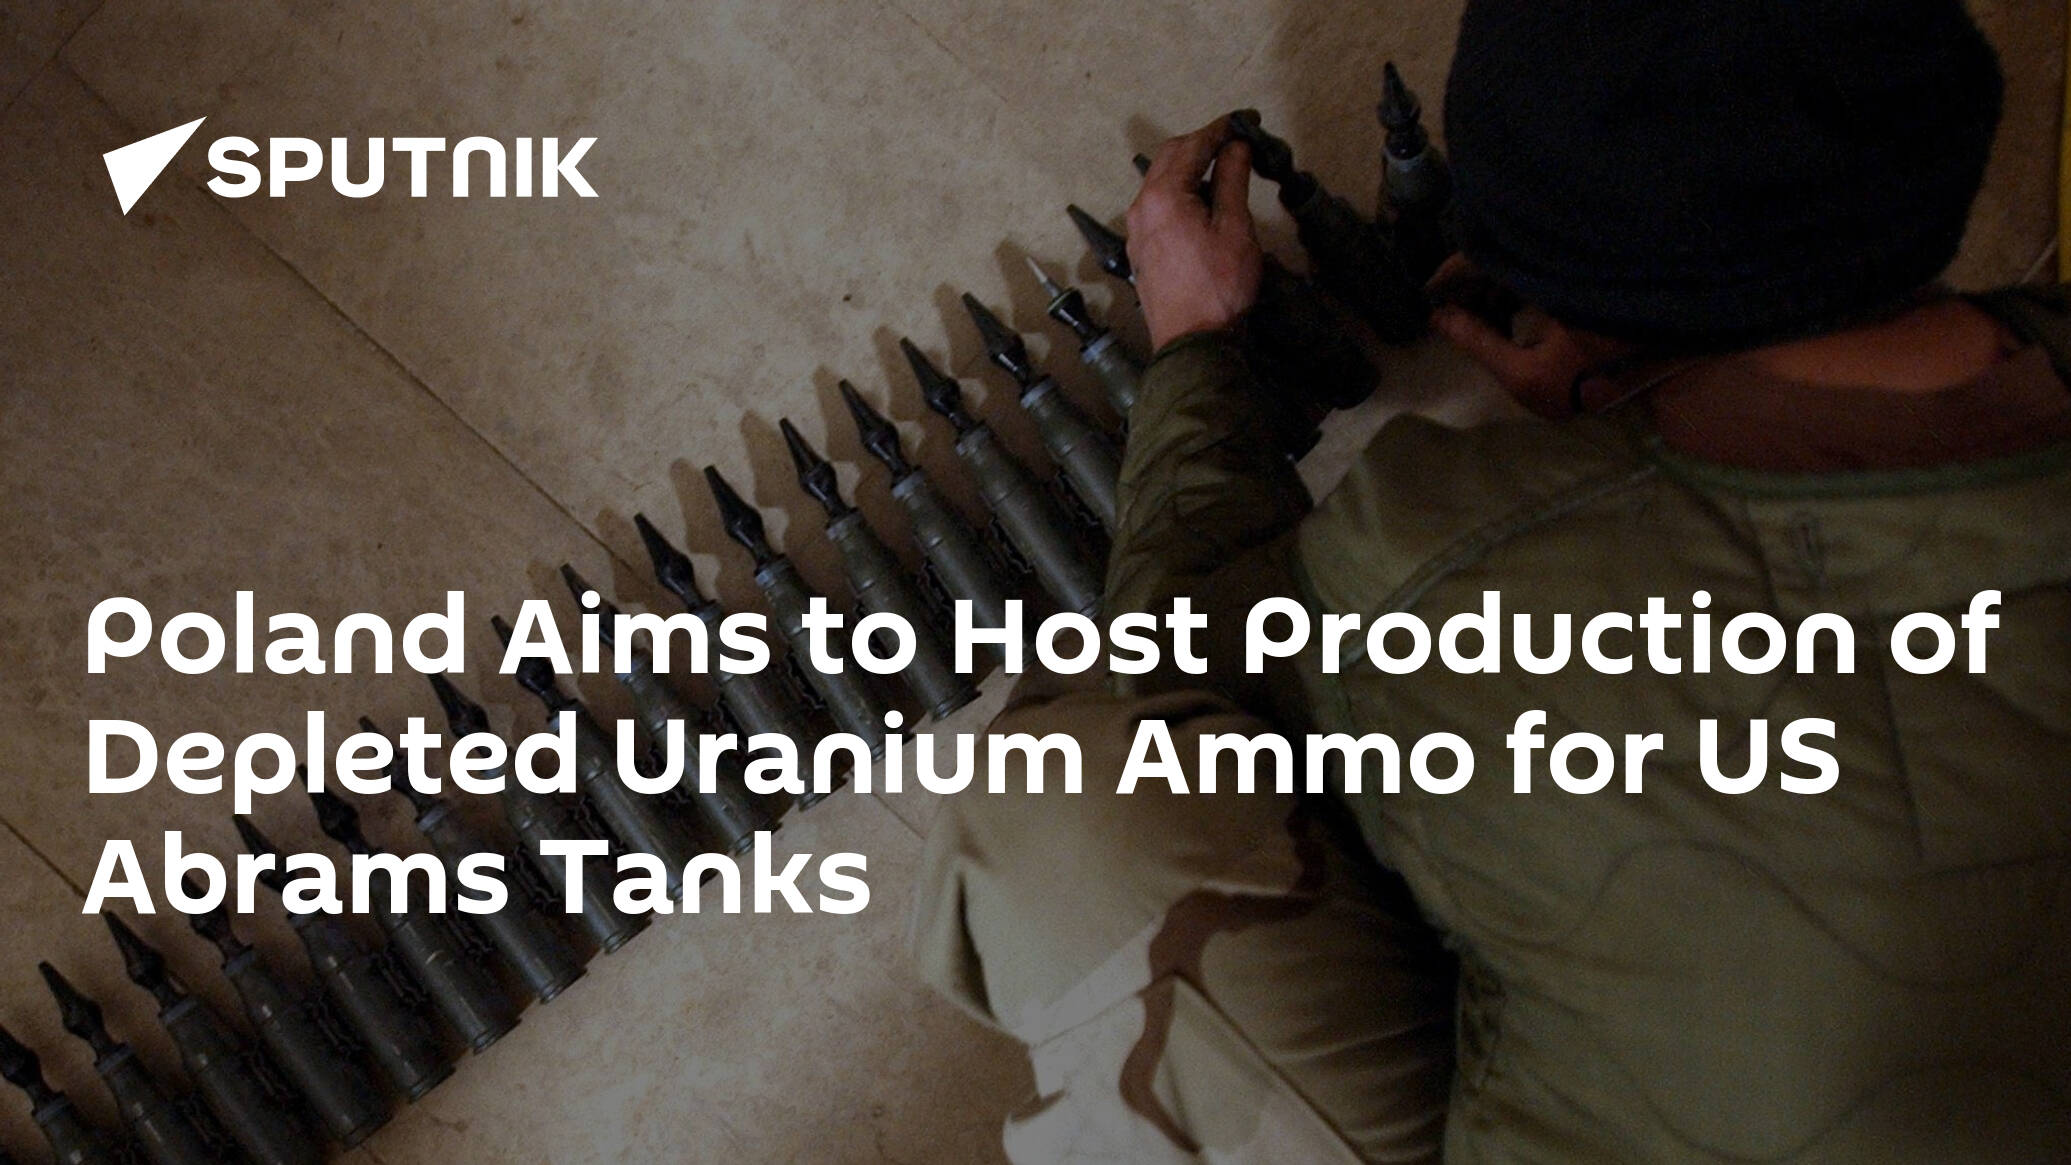 Poland Aims to Host Production of Depleted Uranium Ammo for US Abrams Tanks